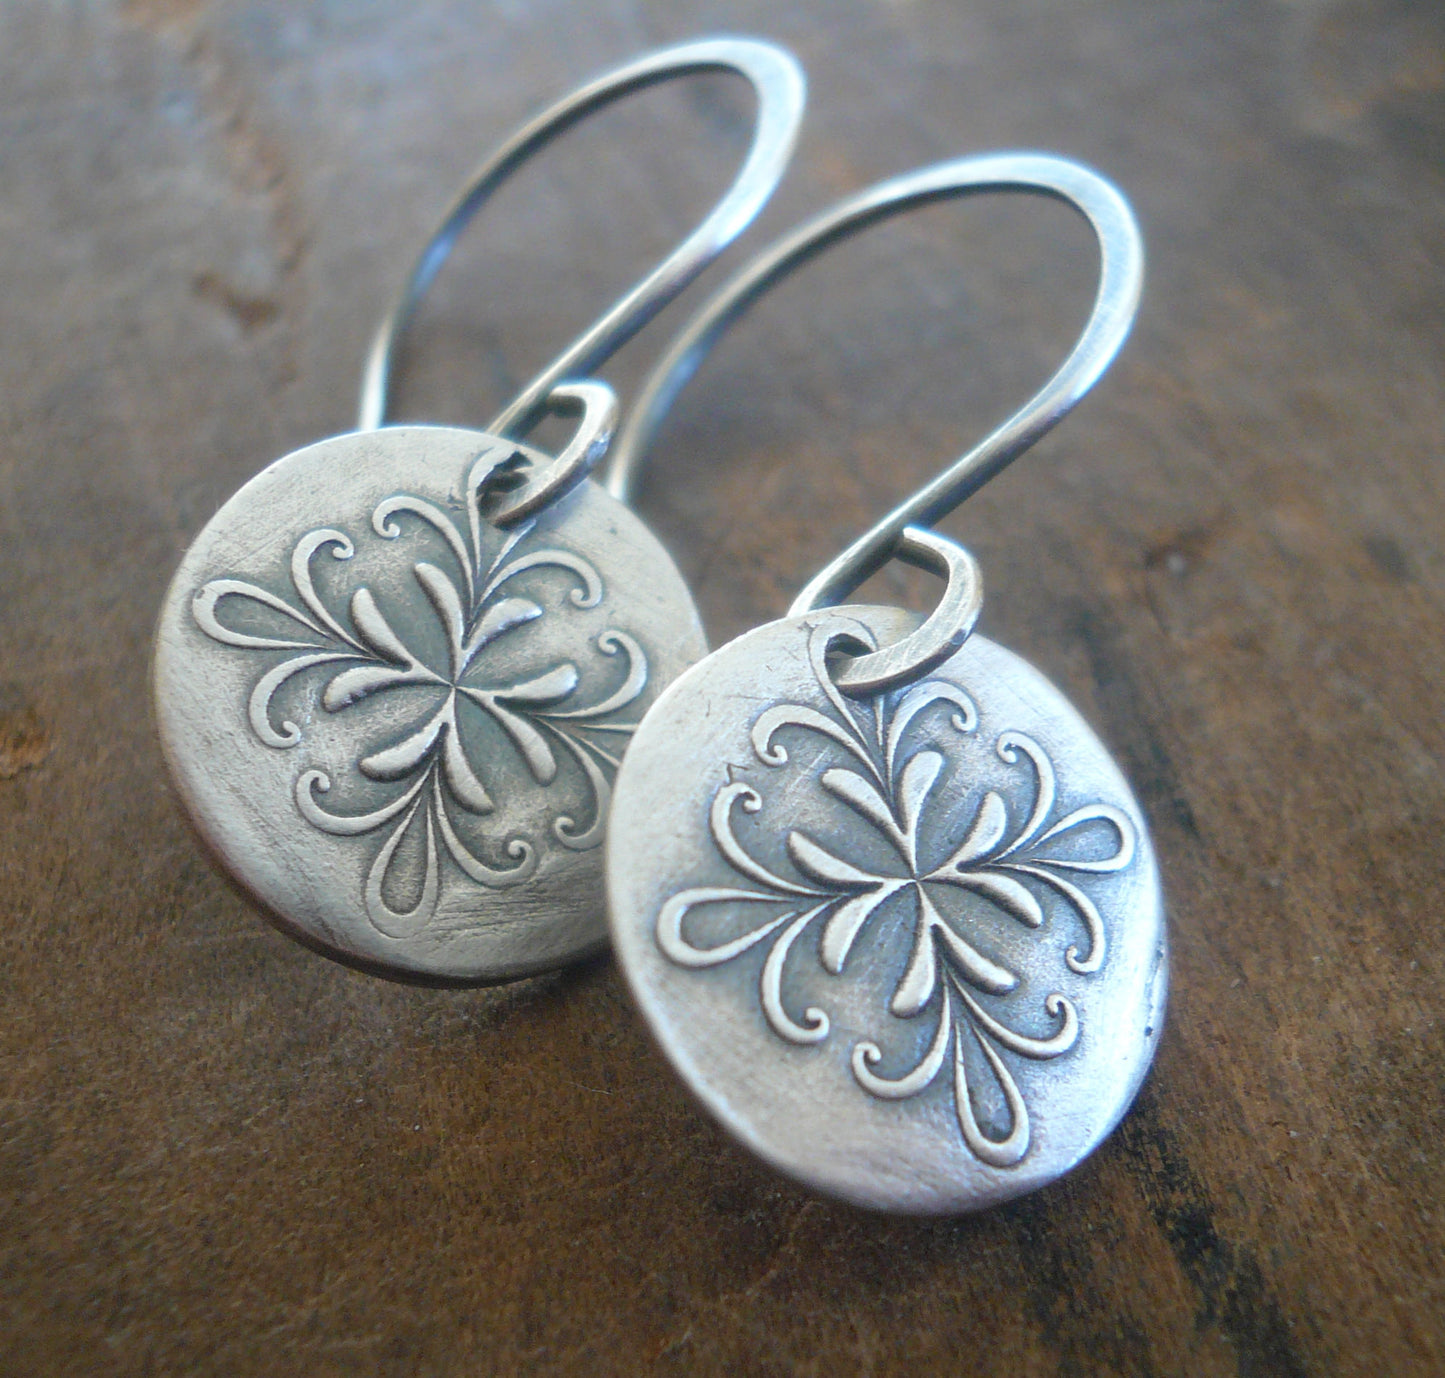 Medallion Earrings Medium Style I - Handmade. Oxidized fine and sterling silver